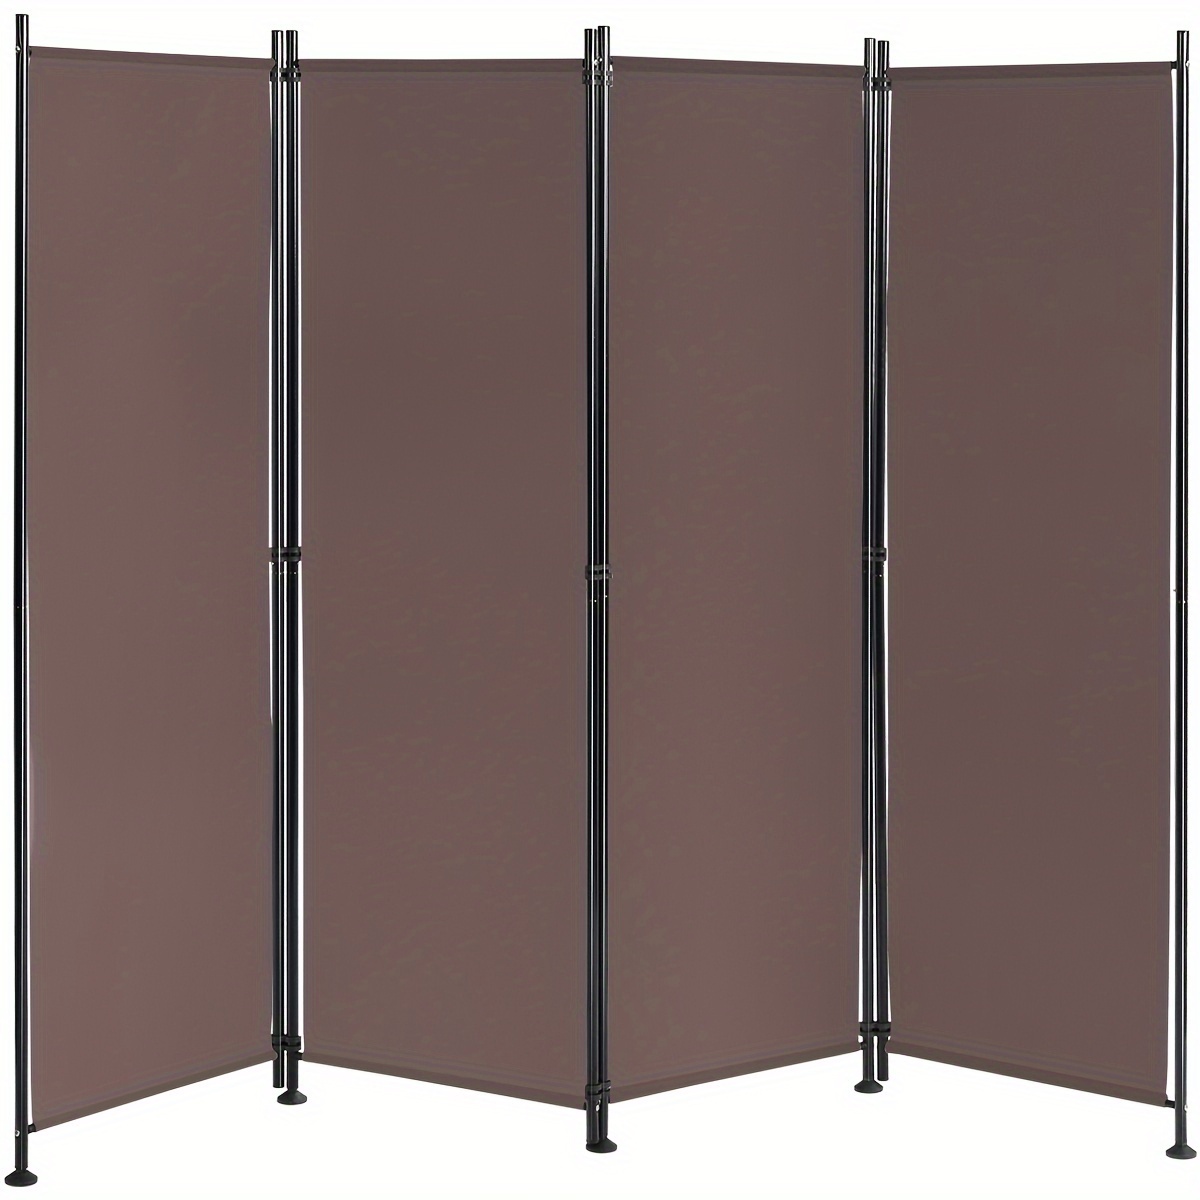 

Costway 4-panel Steel Frame Room Divider, Folding Privacy Screen, Home Interior Decoration, Brown, 67" Height X 88" Width